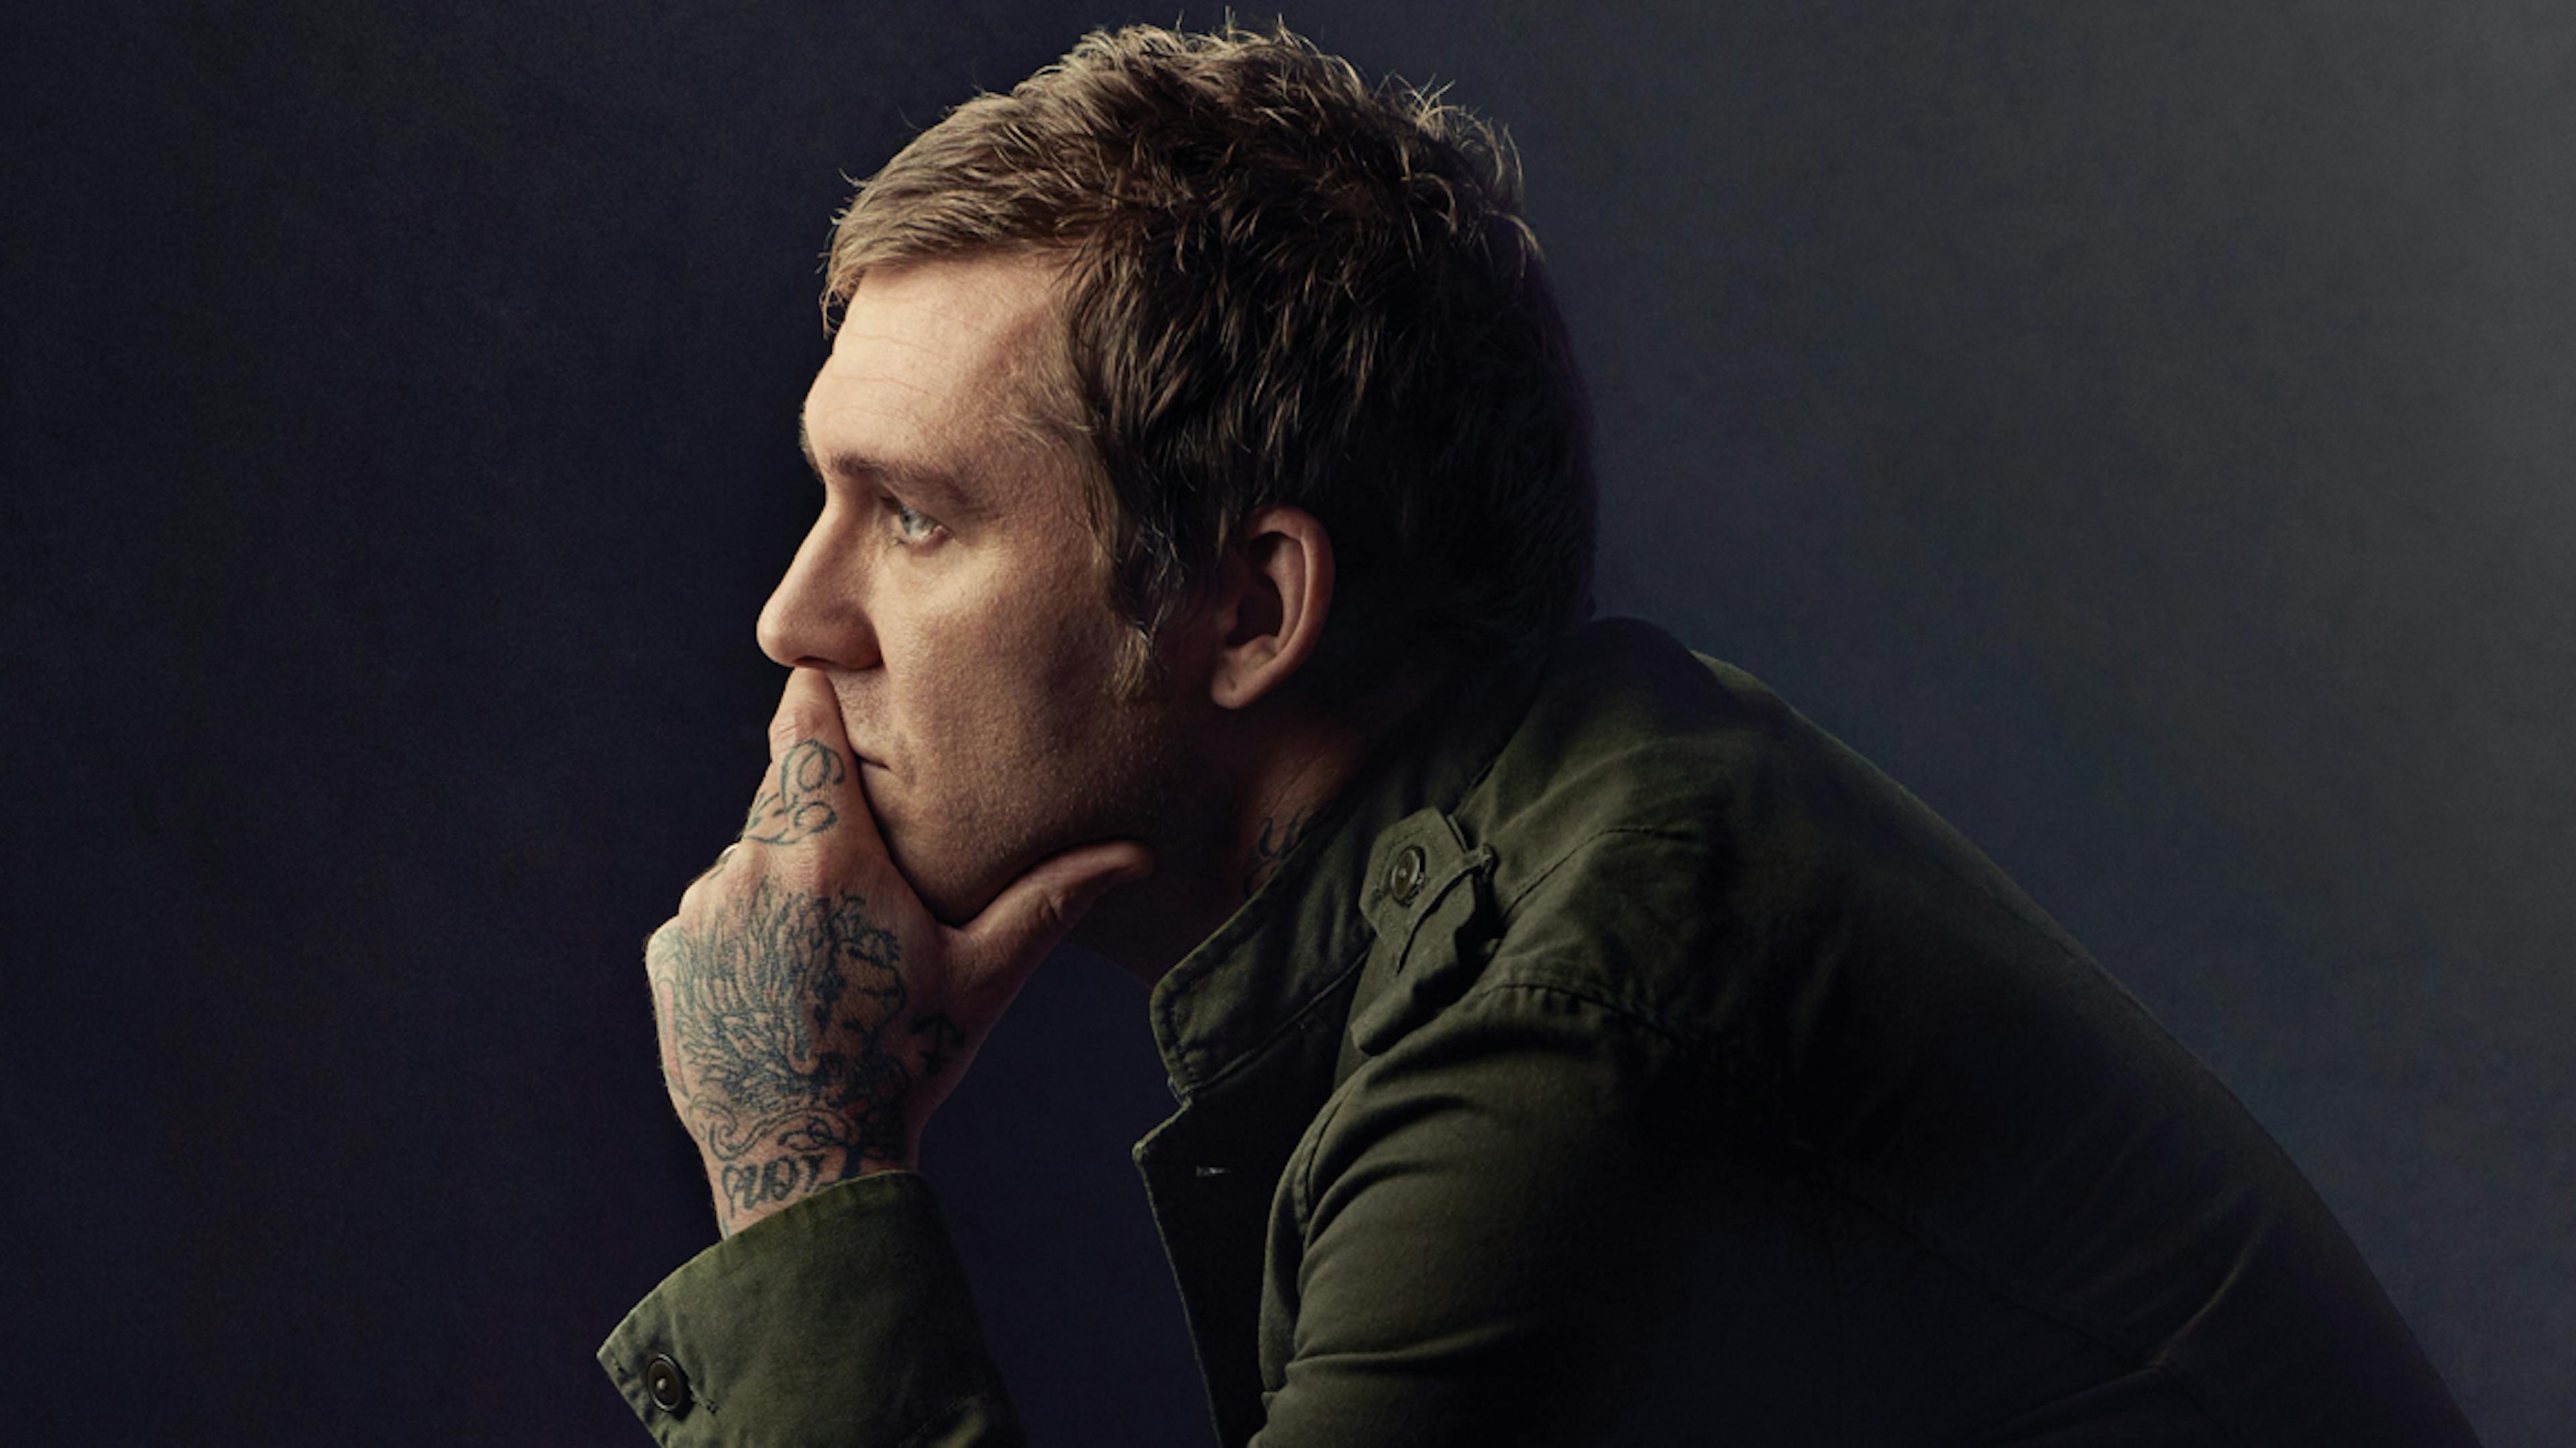 Brian Fallon Has Released A Beautiful New Song, Silence